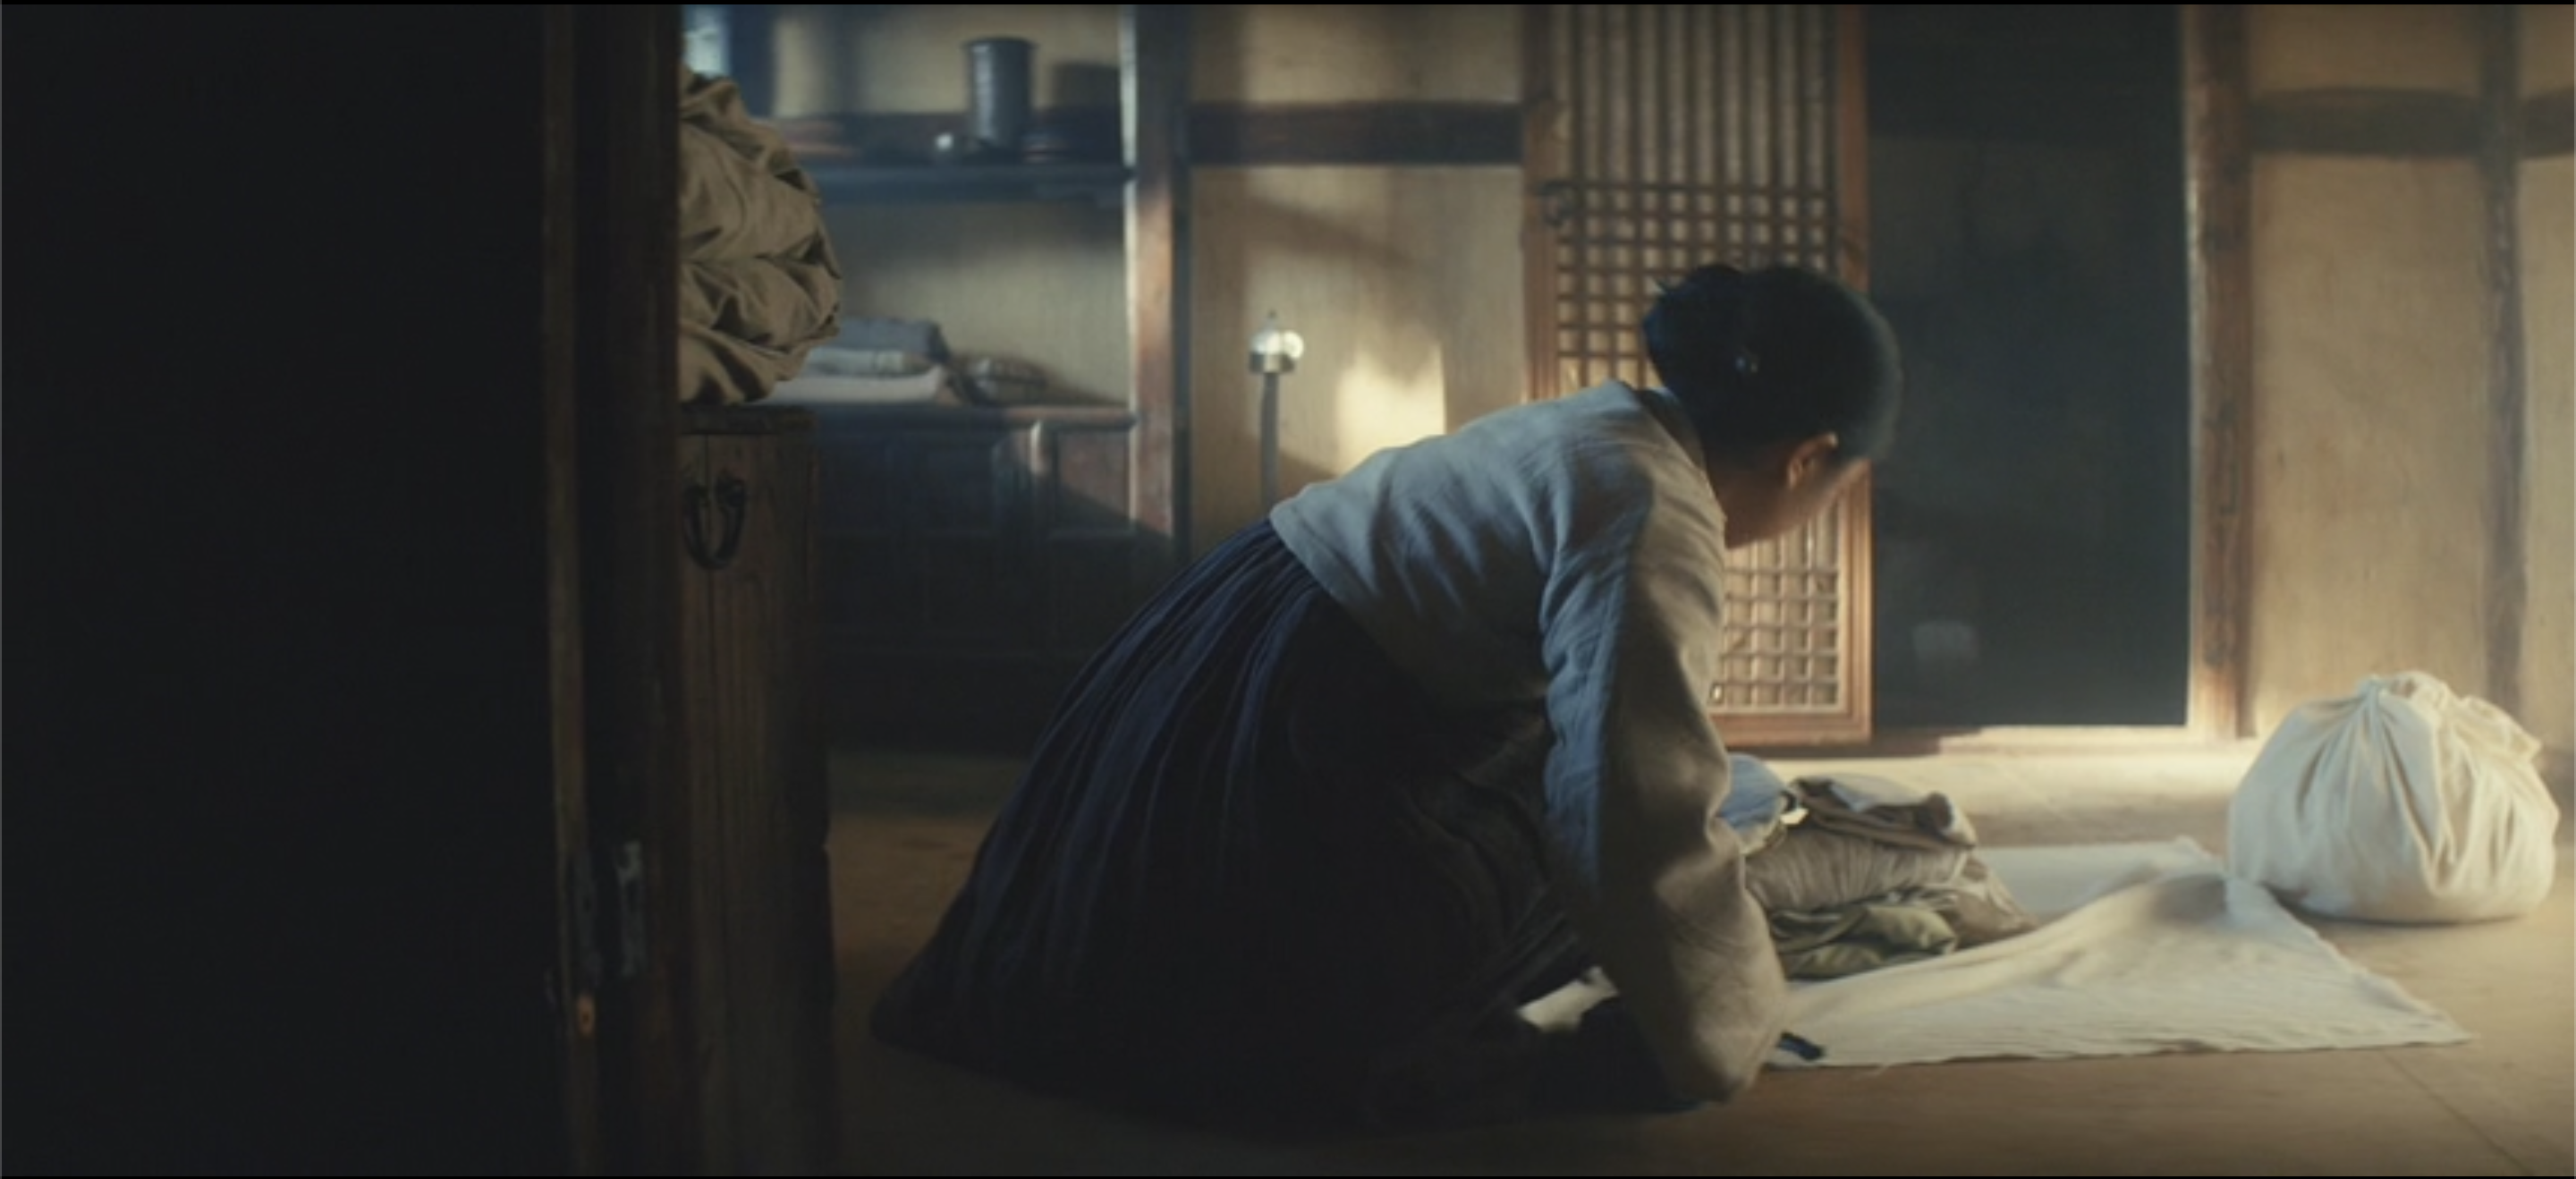 On the 1930s set, Yangjin packs her daughter Sunja's belongings ahead of the latter's journey to Osaka. As the camera slowly tracks left, Sunja's room in Osaka fifty years later appears in the off-screen space to the left. Image capture, Pachinko (2022).